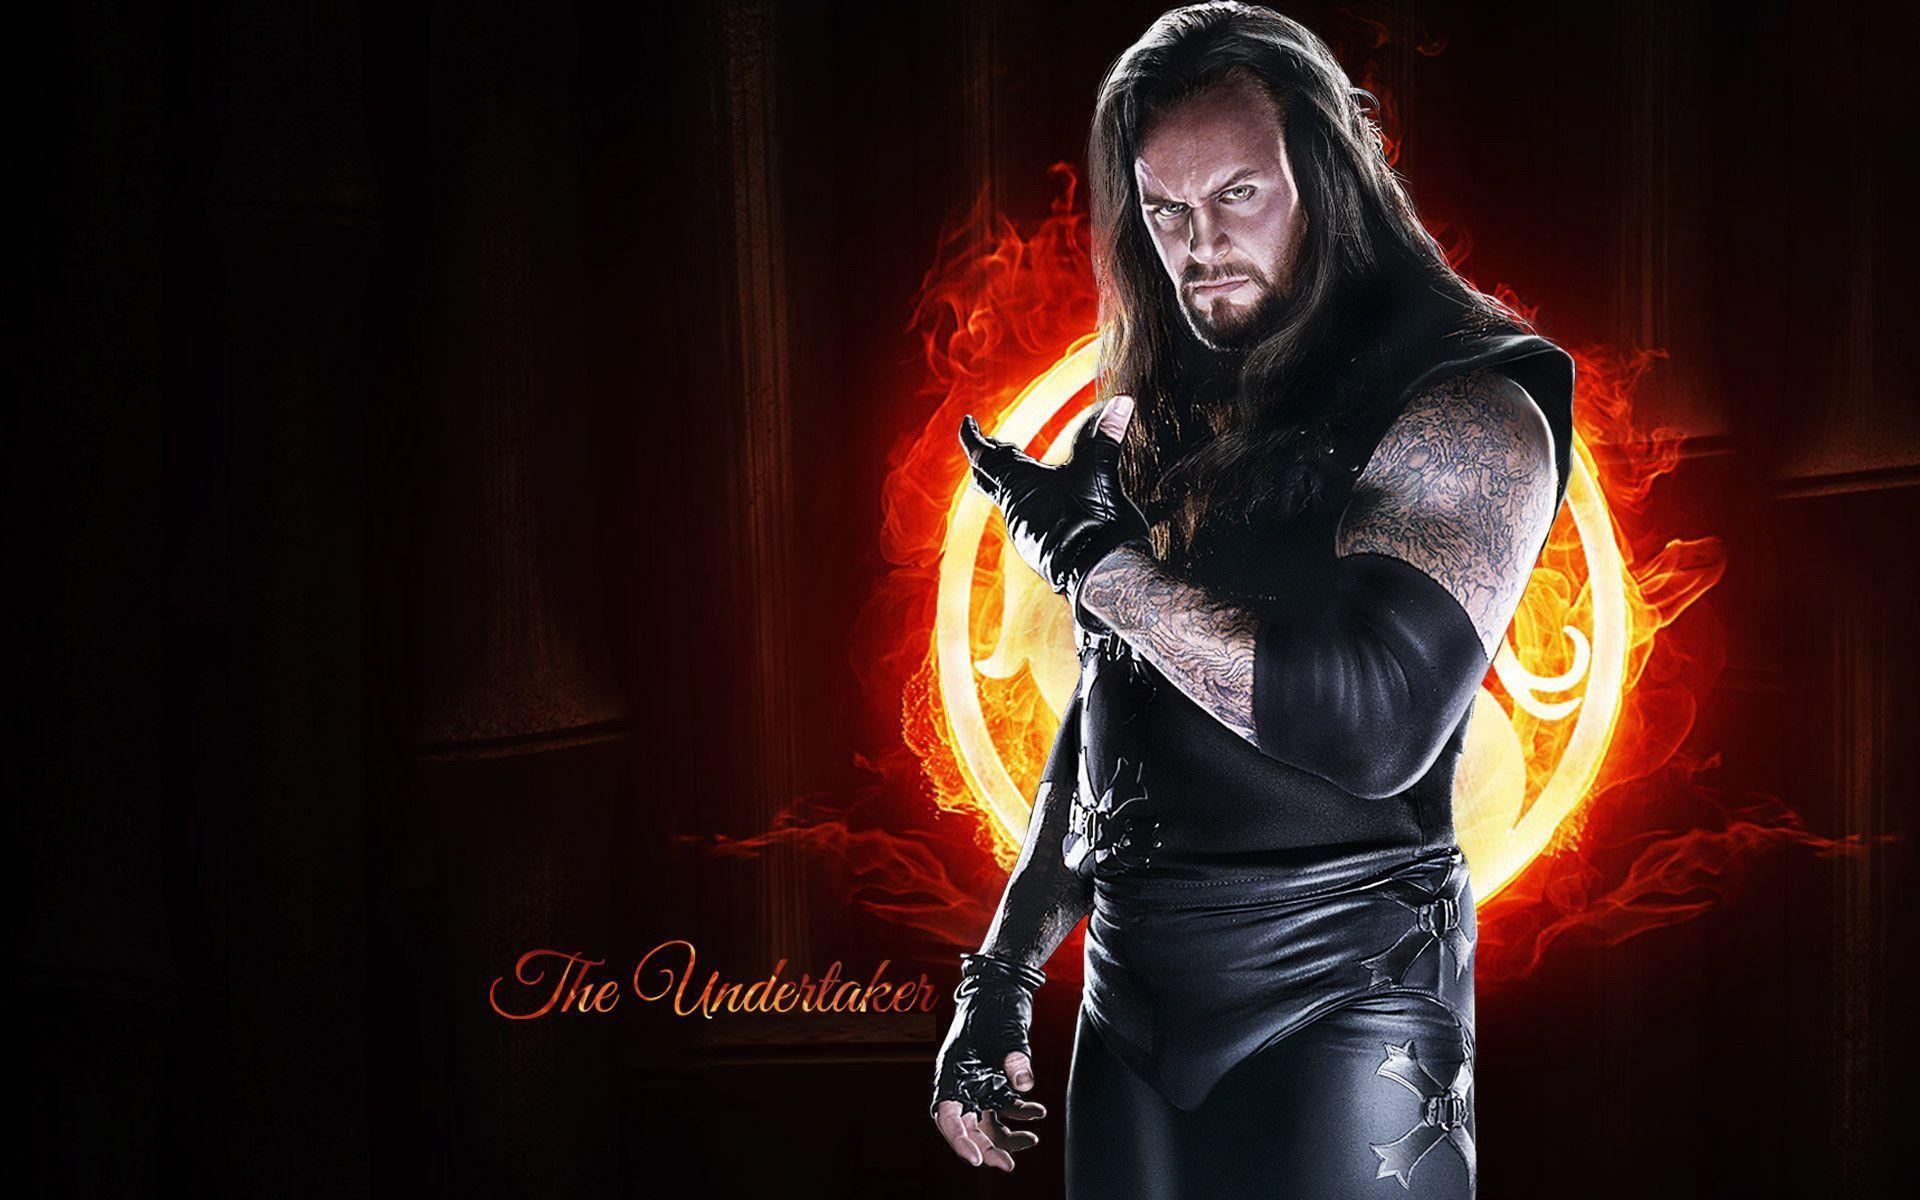 The Undertaker New 2014 Image Download